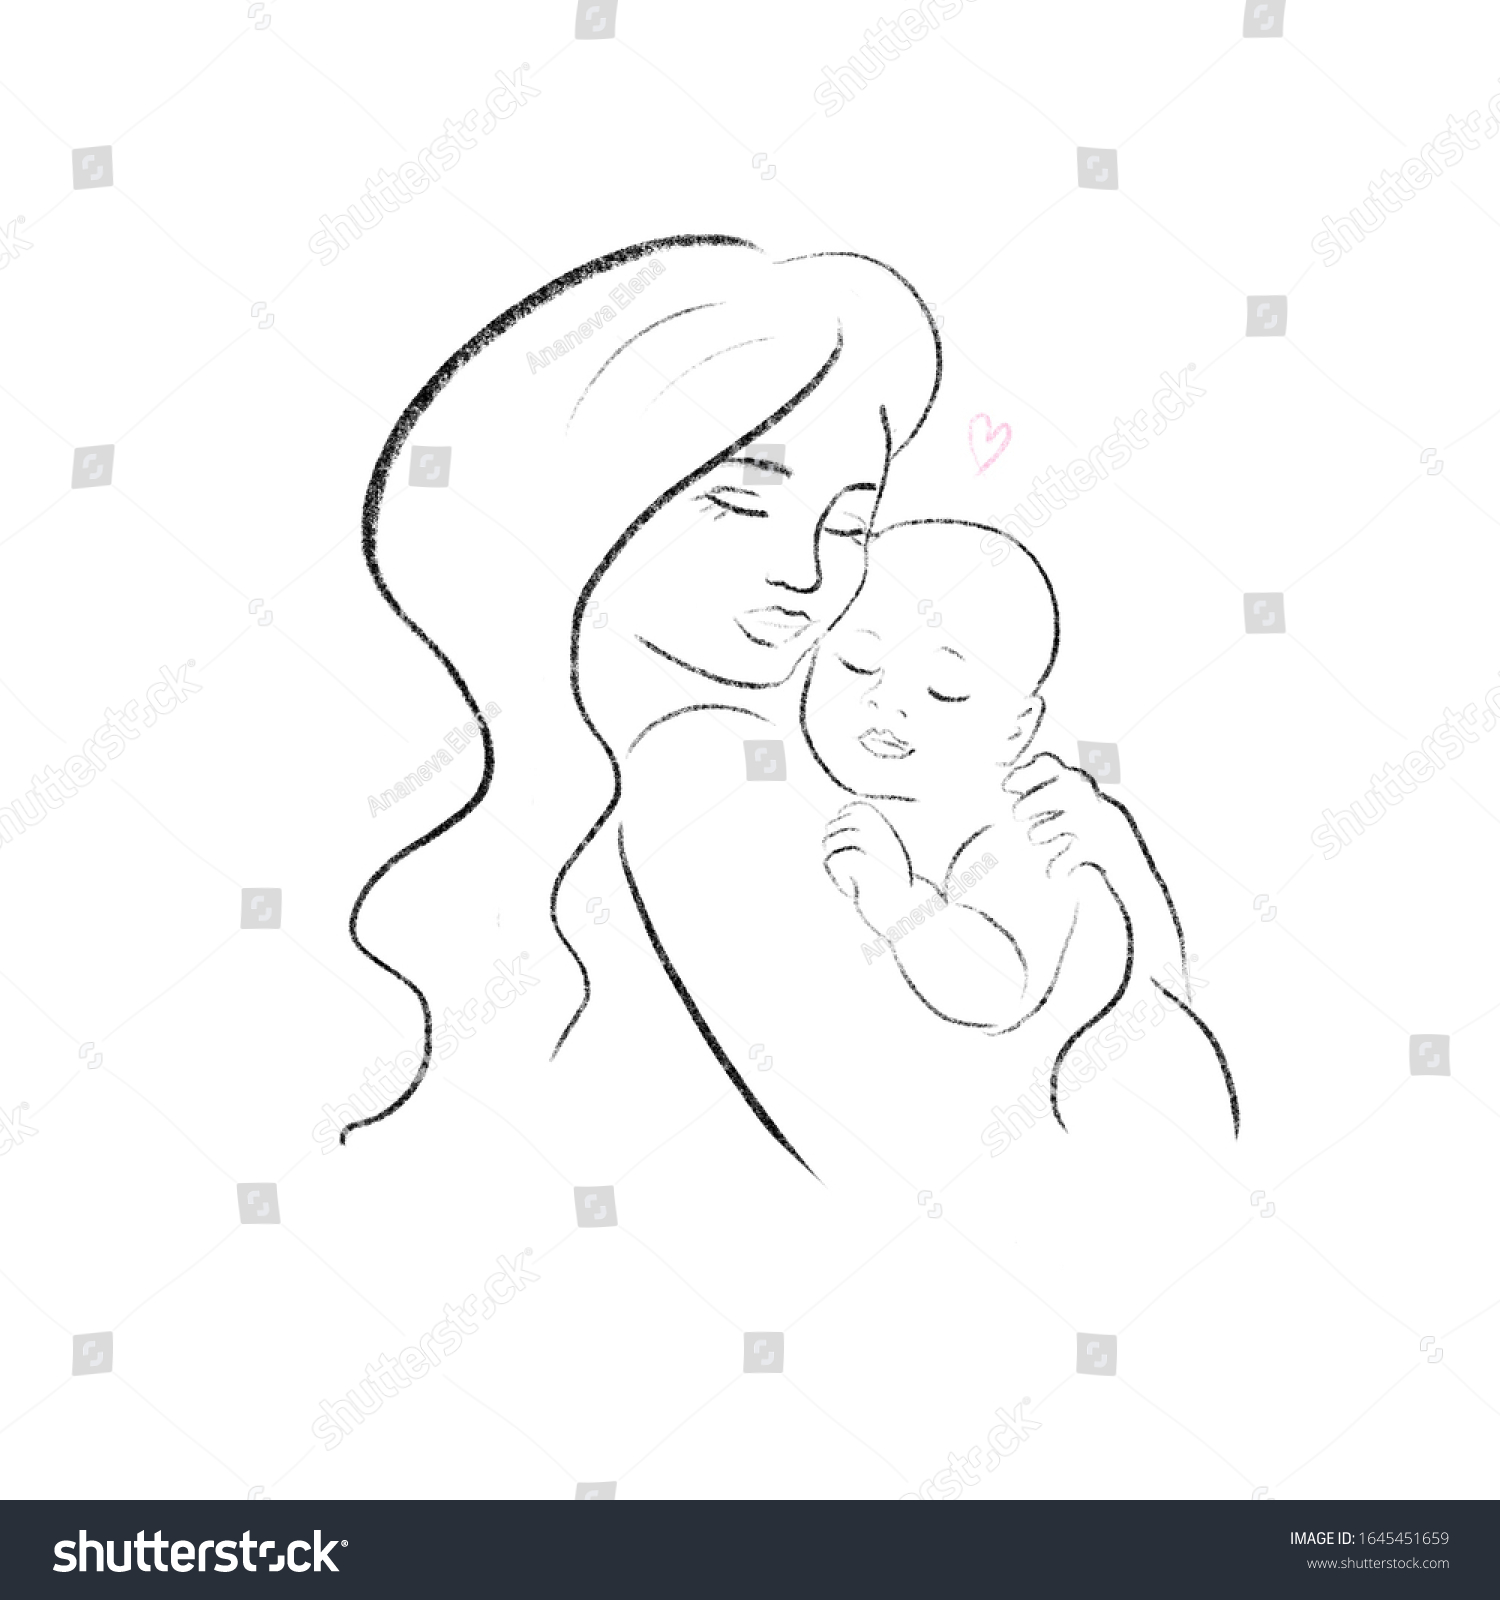 Baby Arms Sketch Stock Illustration 1645451659 | Shutterstock